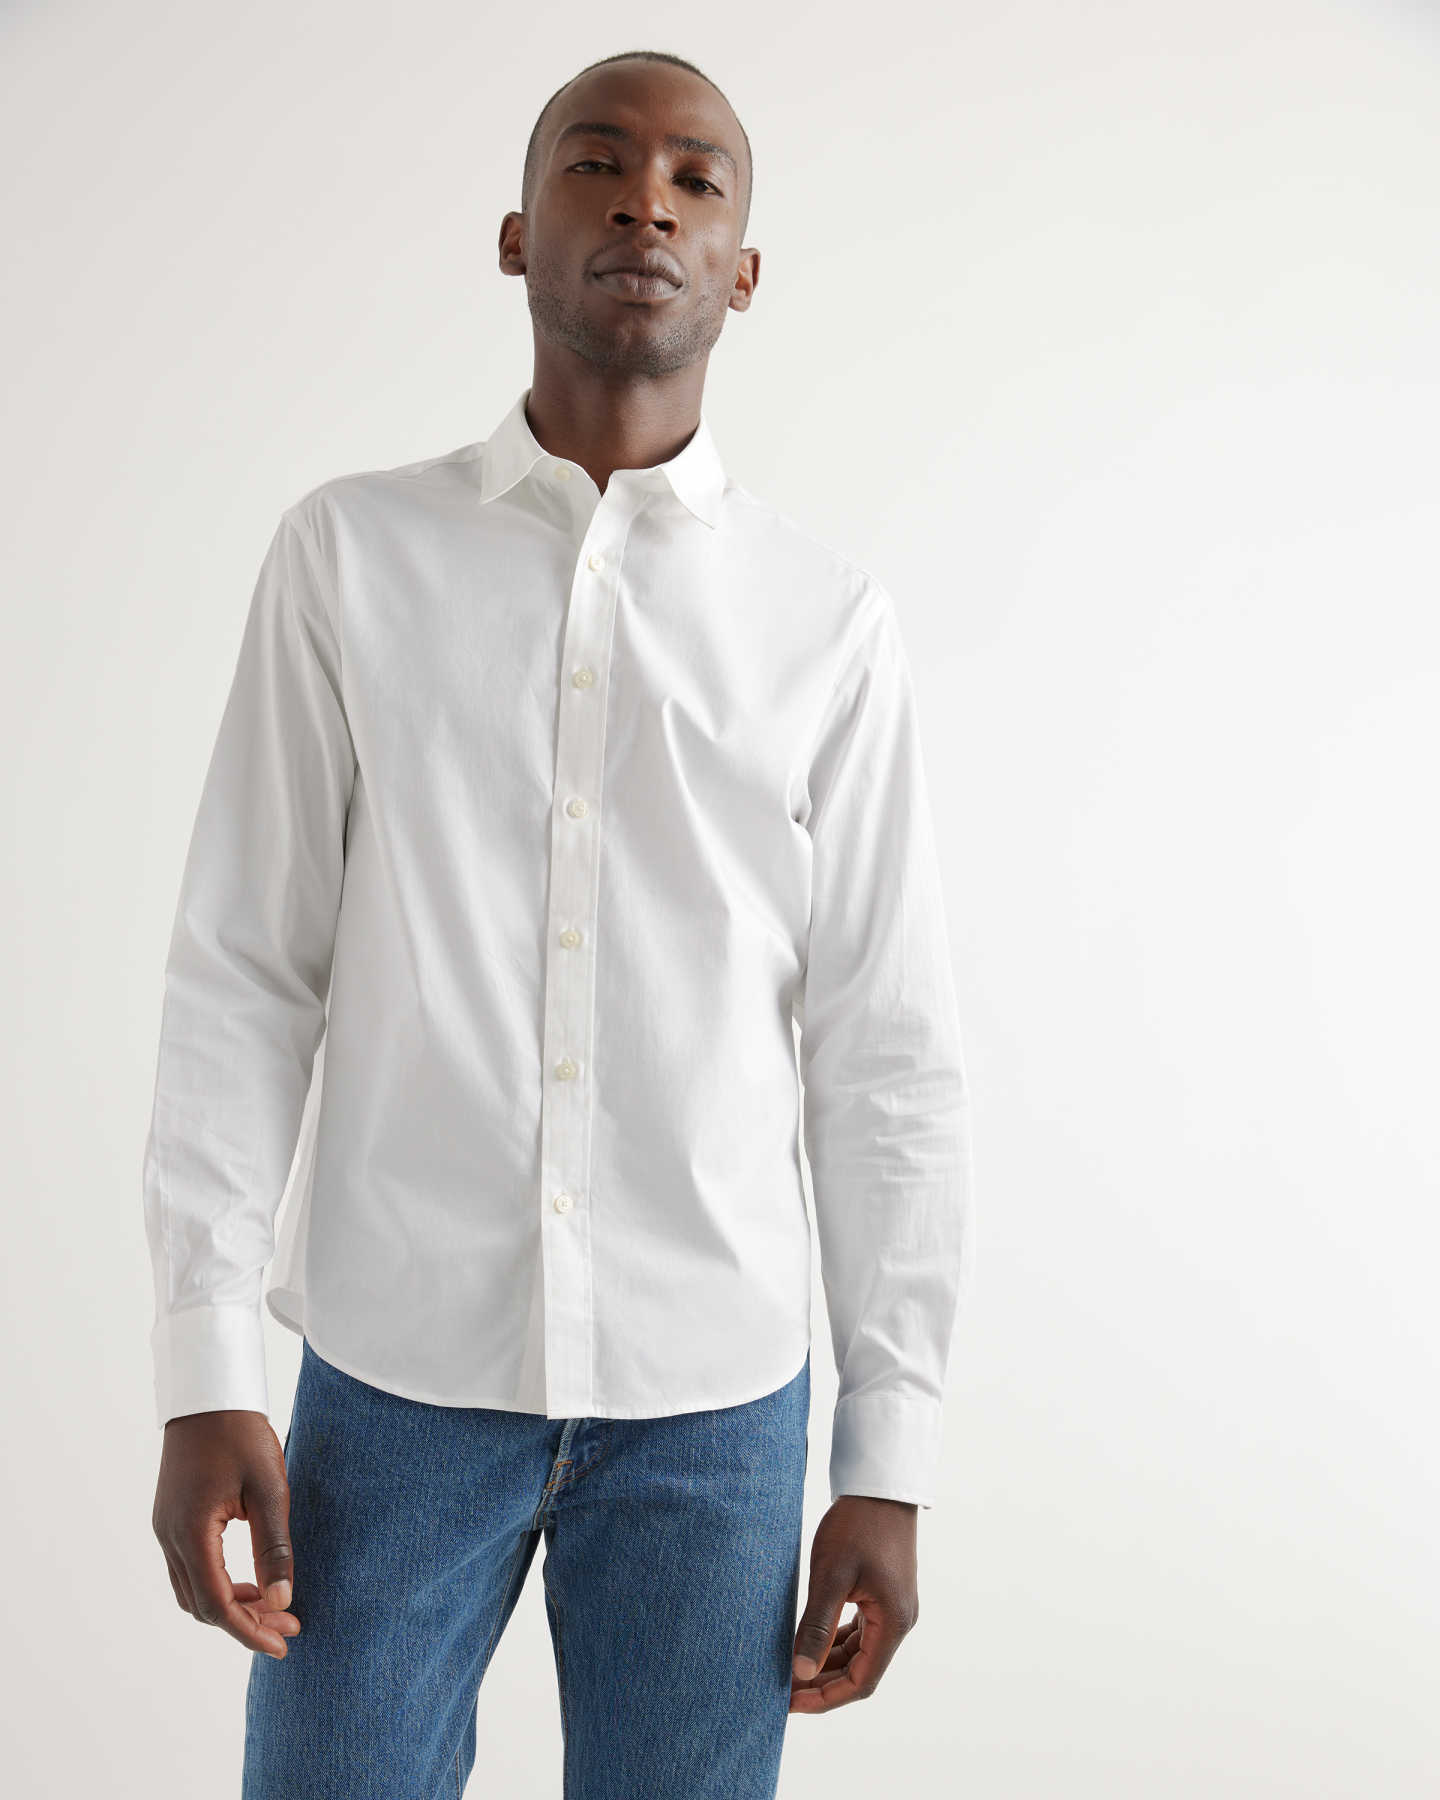 The Untucked Dress Shirt - Solid White - 12